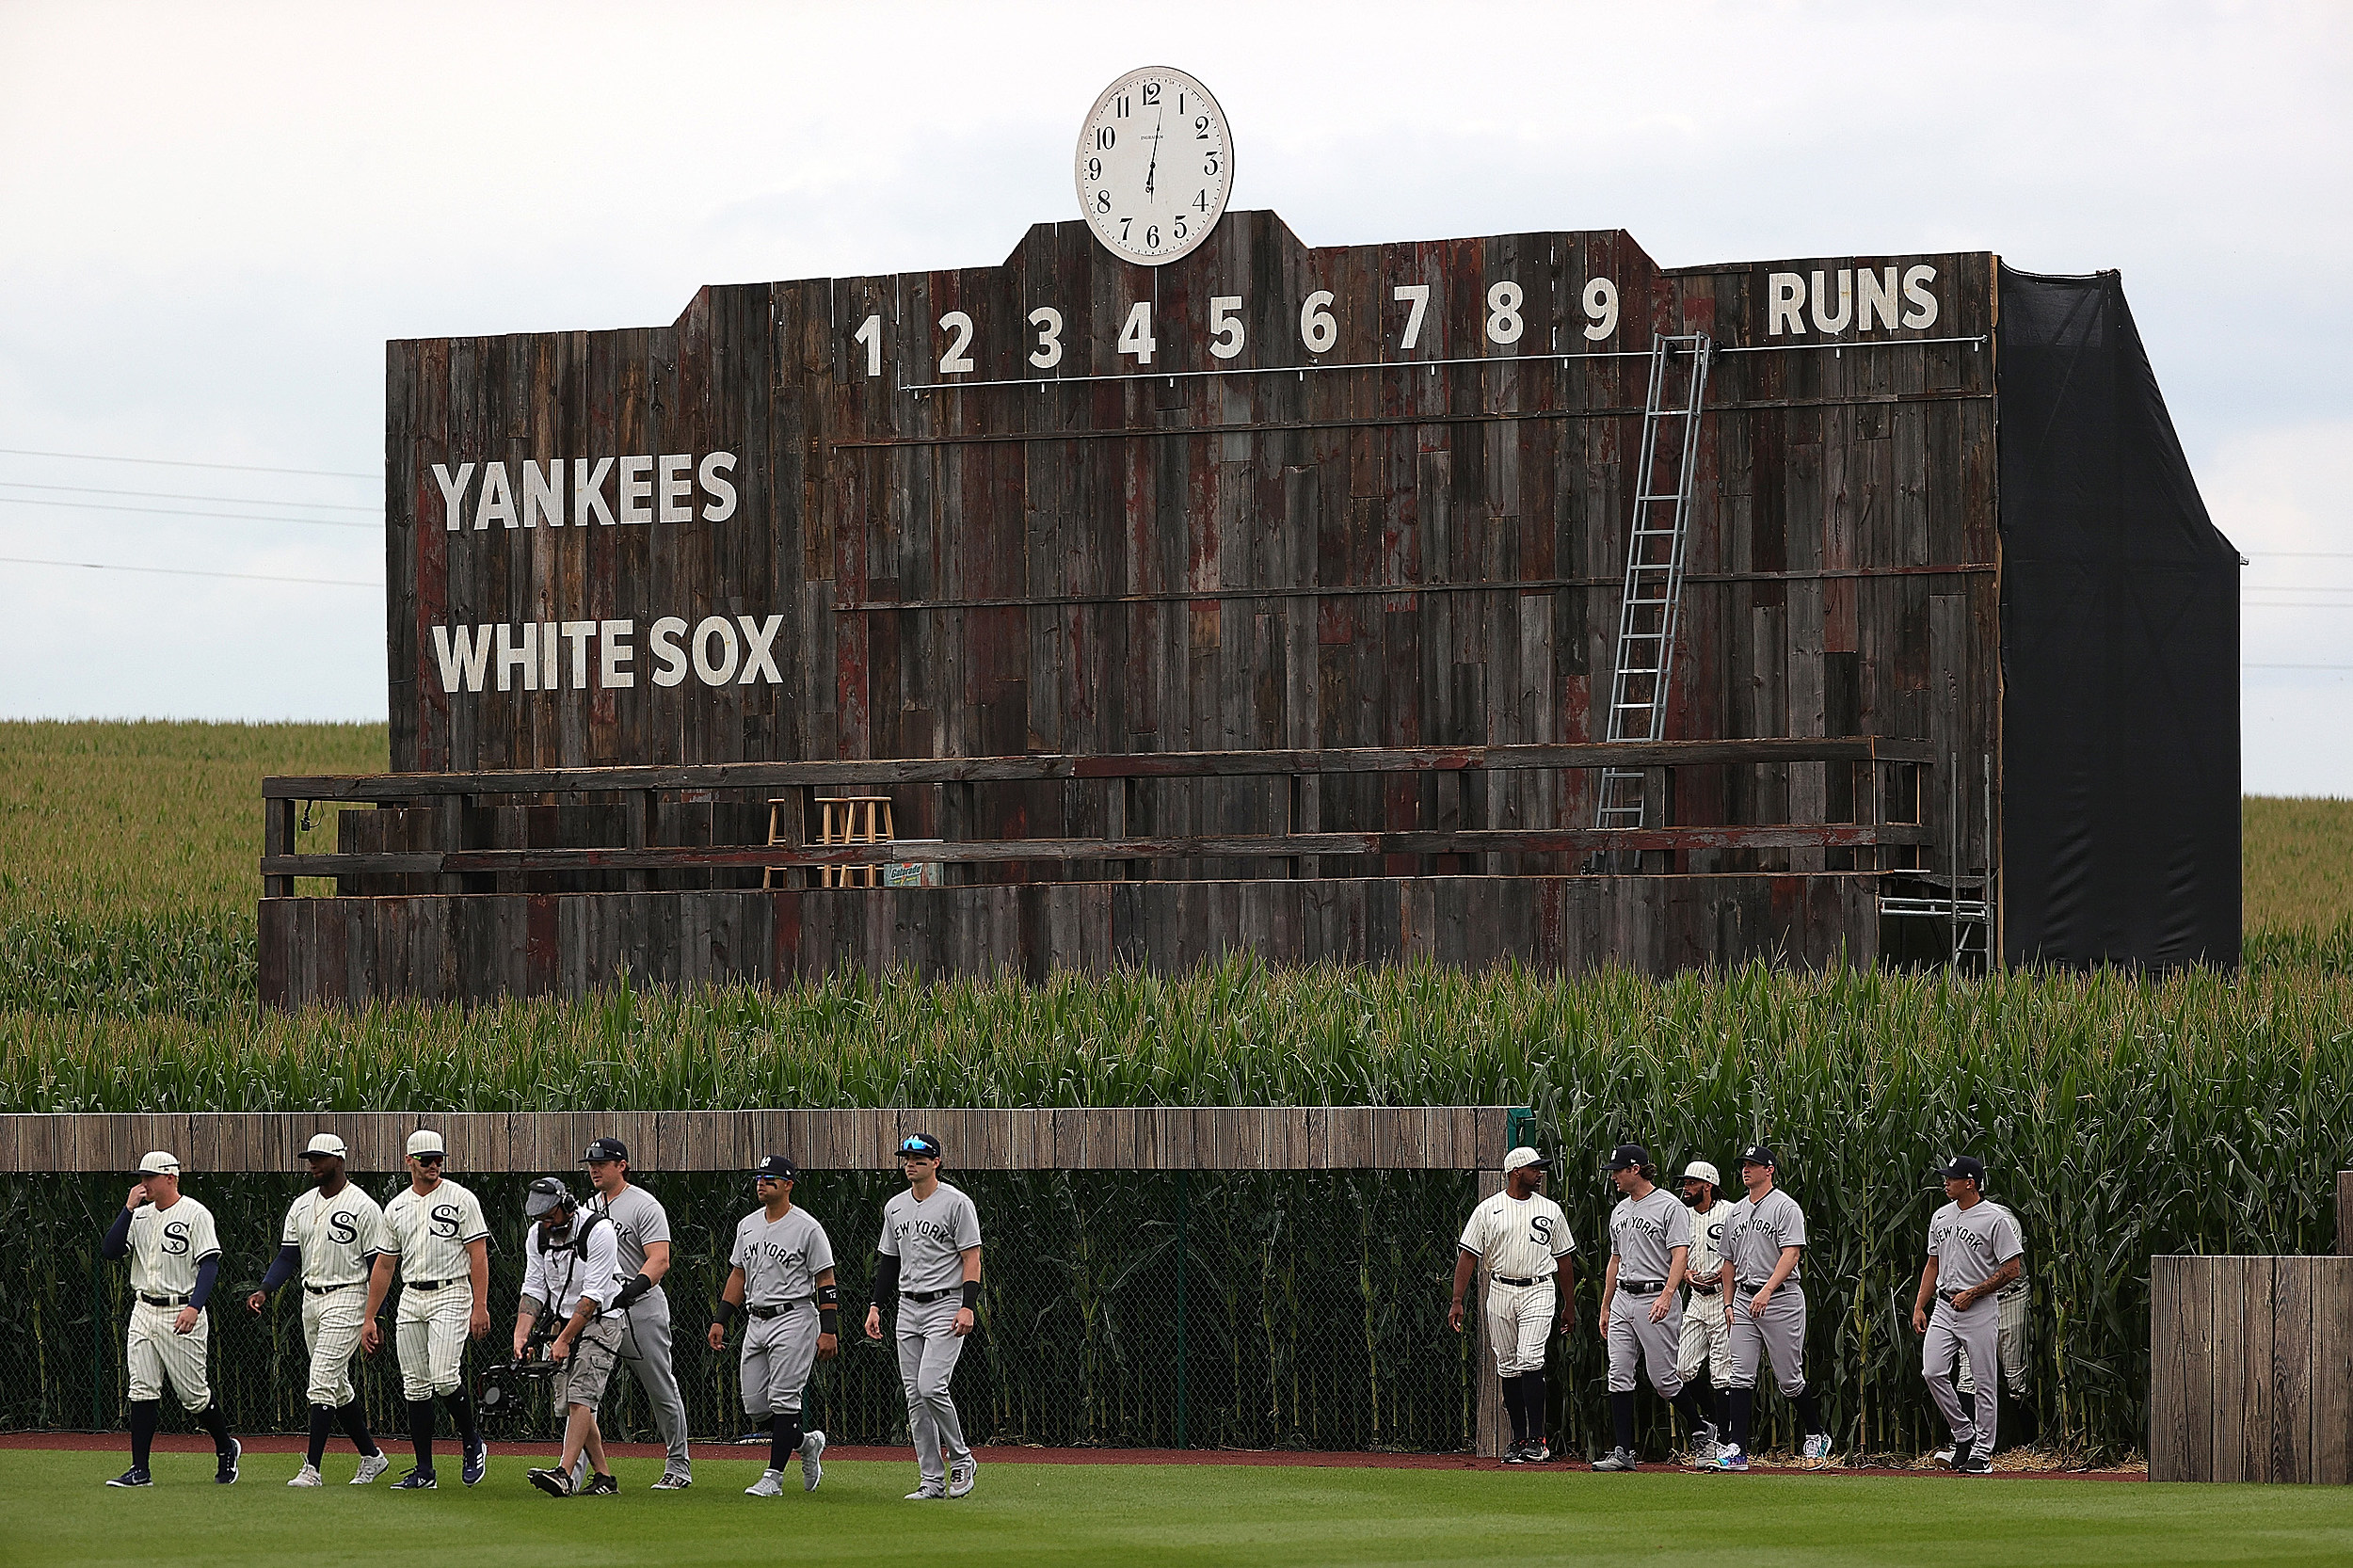 Yankees, White Sox unveil throwback uniforms for 'Field of Dreams